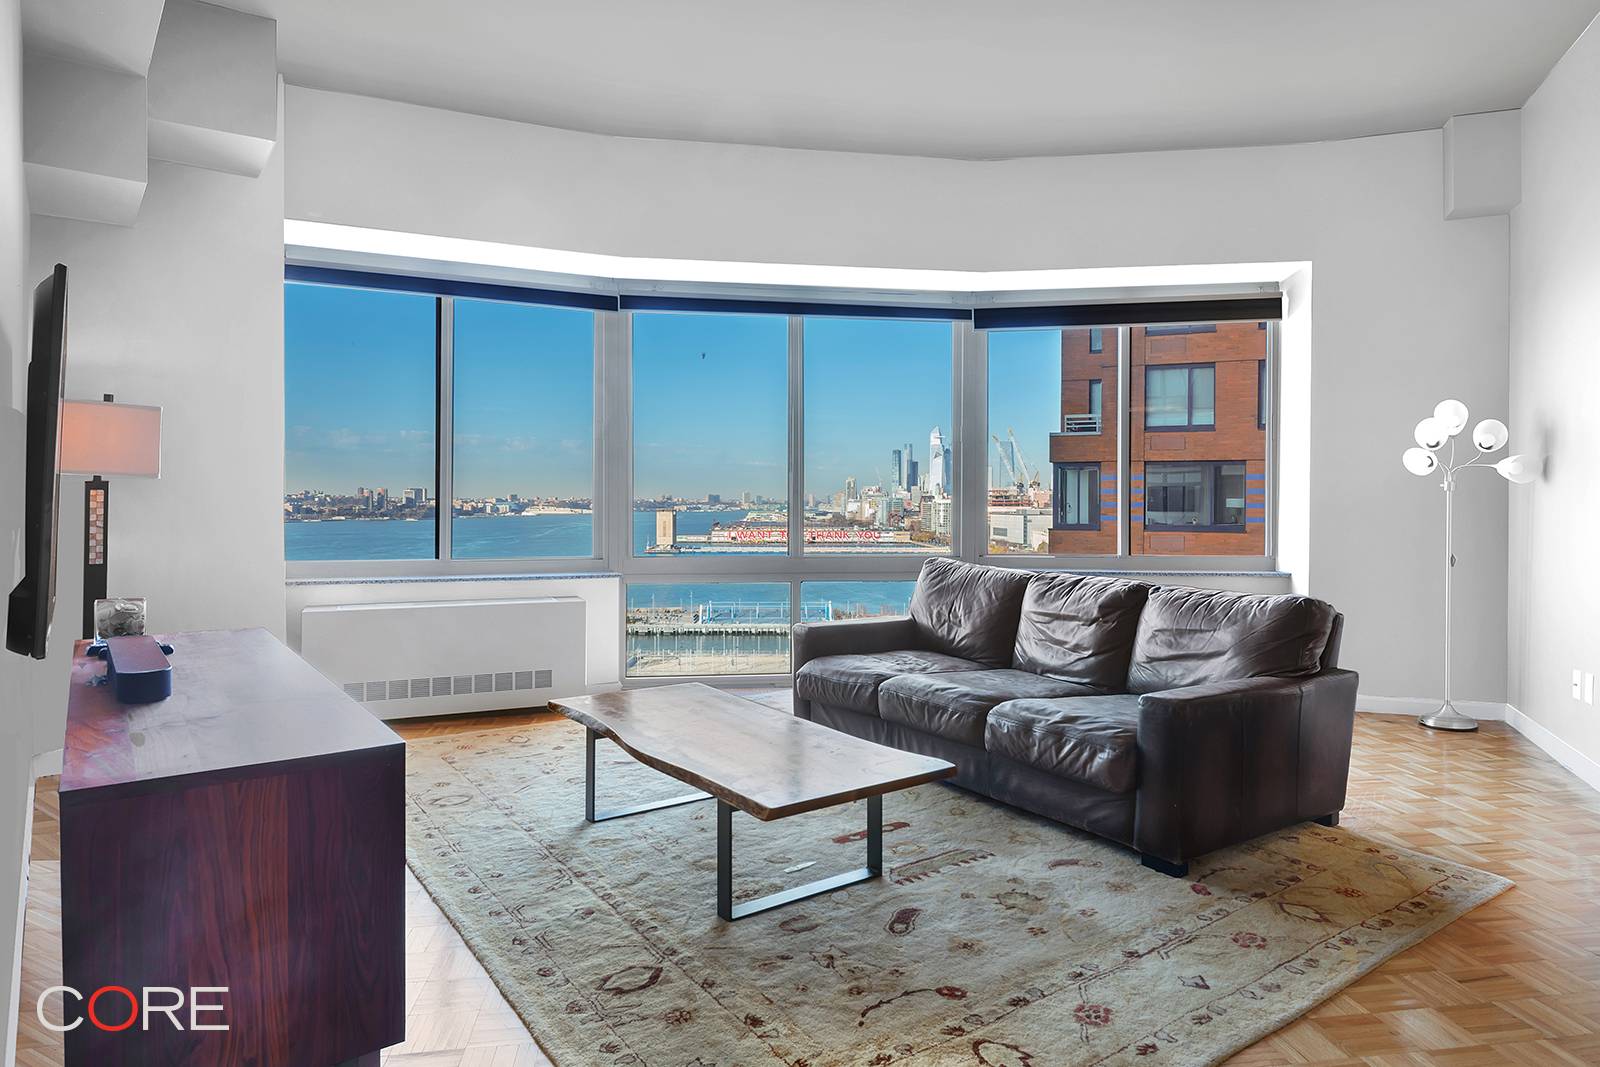 Perched on the 18th floor of Tribeca Park is this gorgeous three bedroom, three bathroom custom home with incredible northern views of the Hudson River.